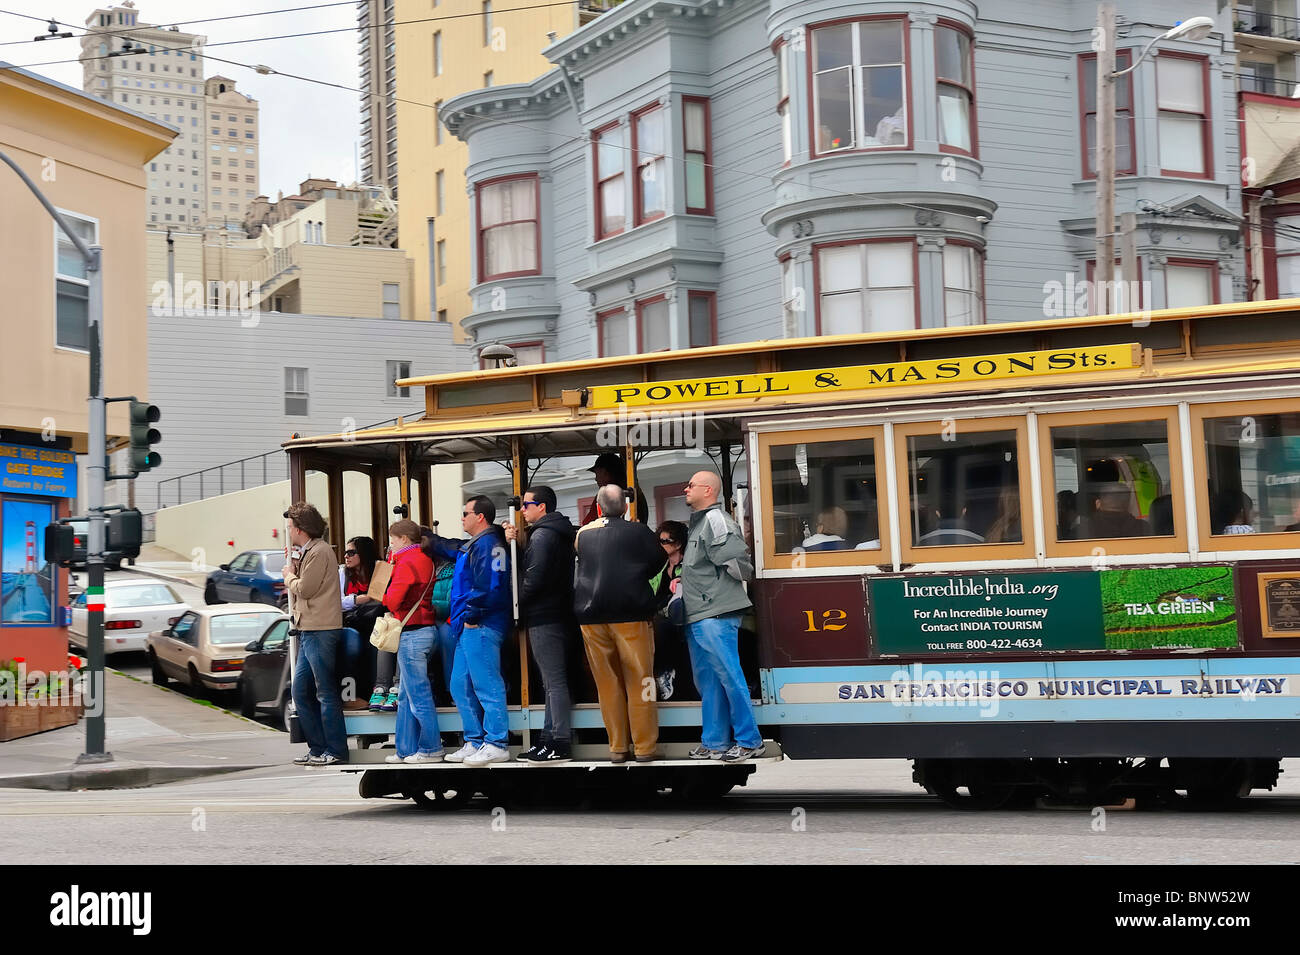 Tourists passengers riding classic cable car a/k/a trolley car or tram, San Francisco, California, USA Powell and Mason Street Line Stock Photo